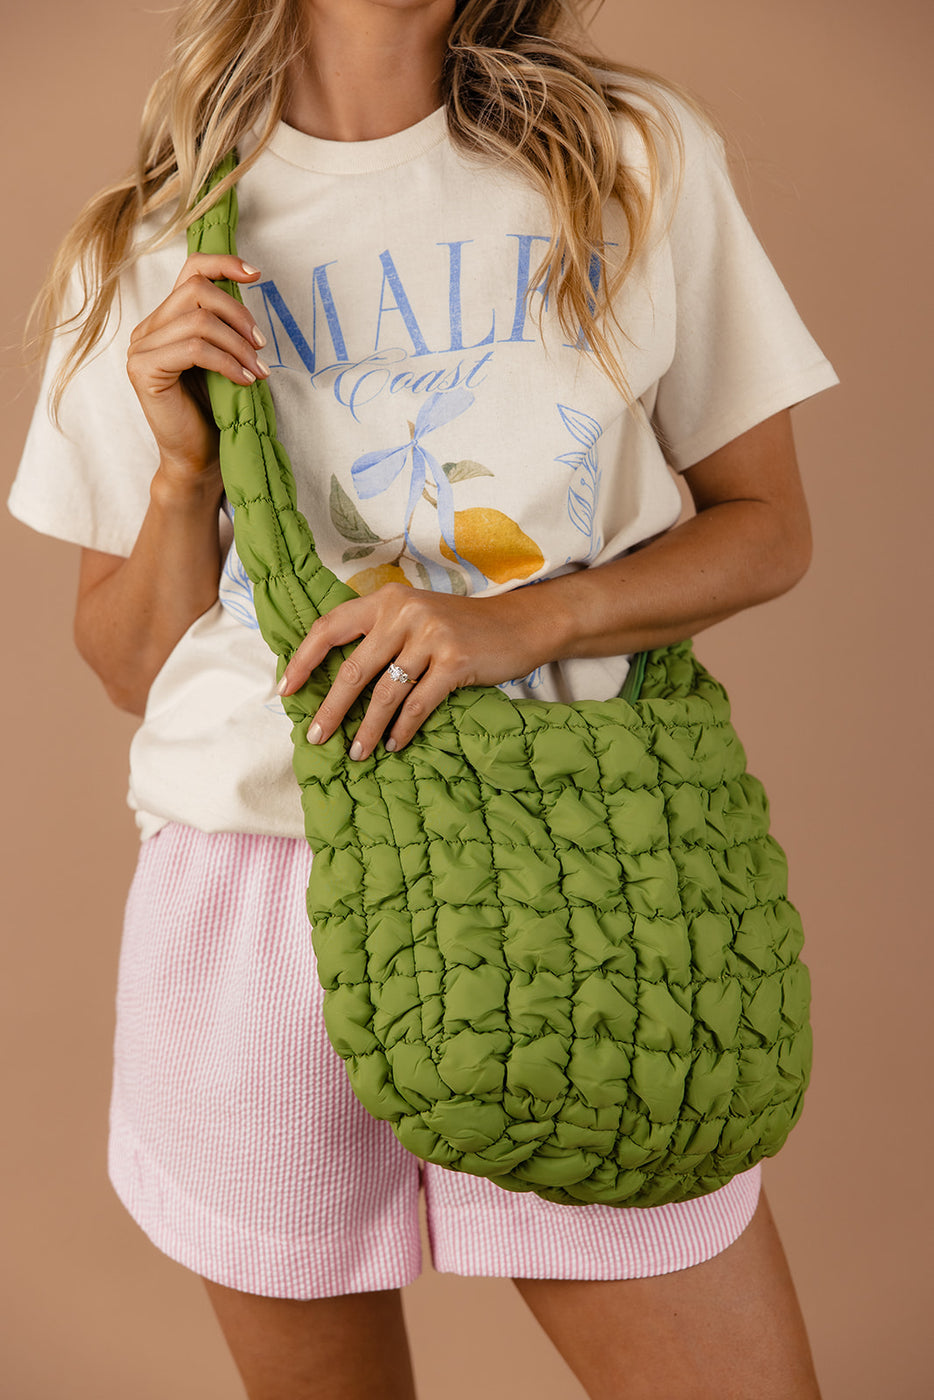 a woman holding a green bag